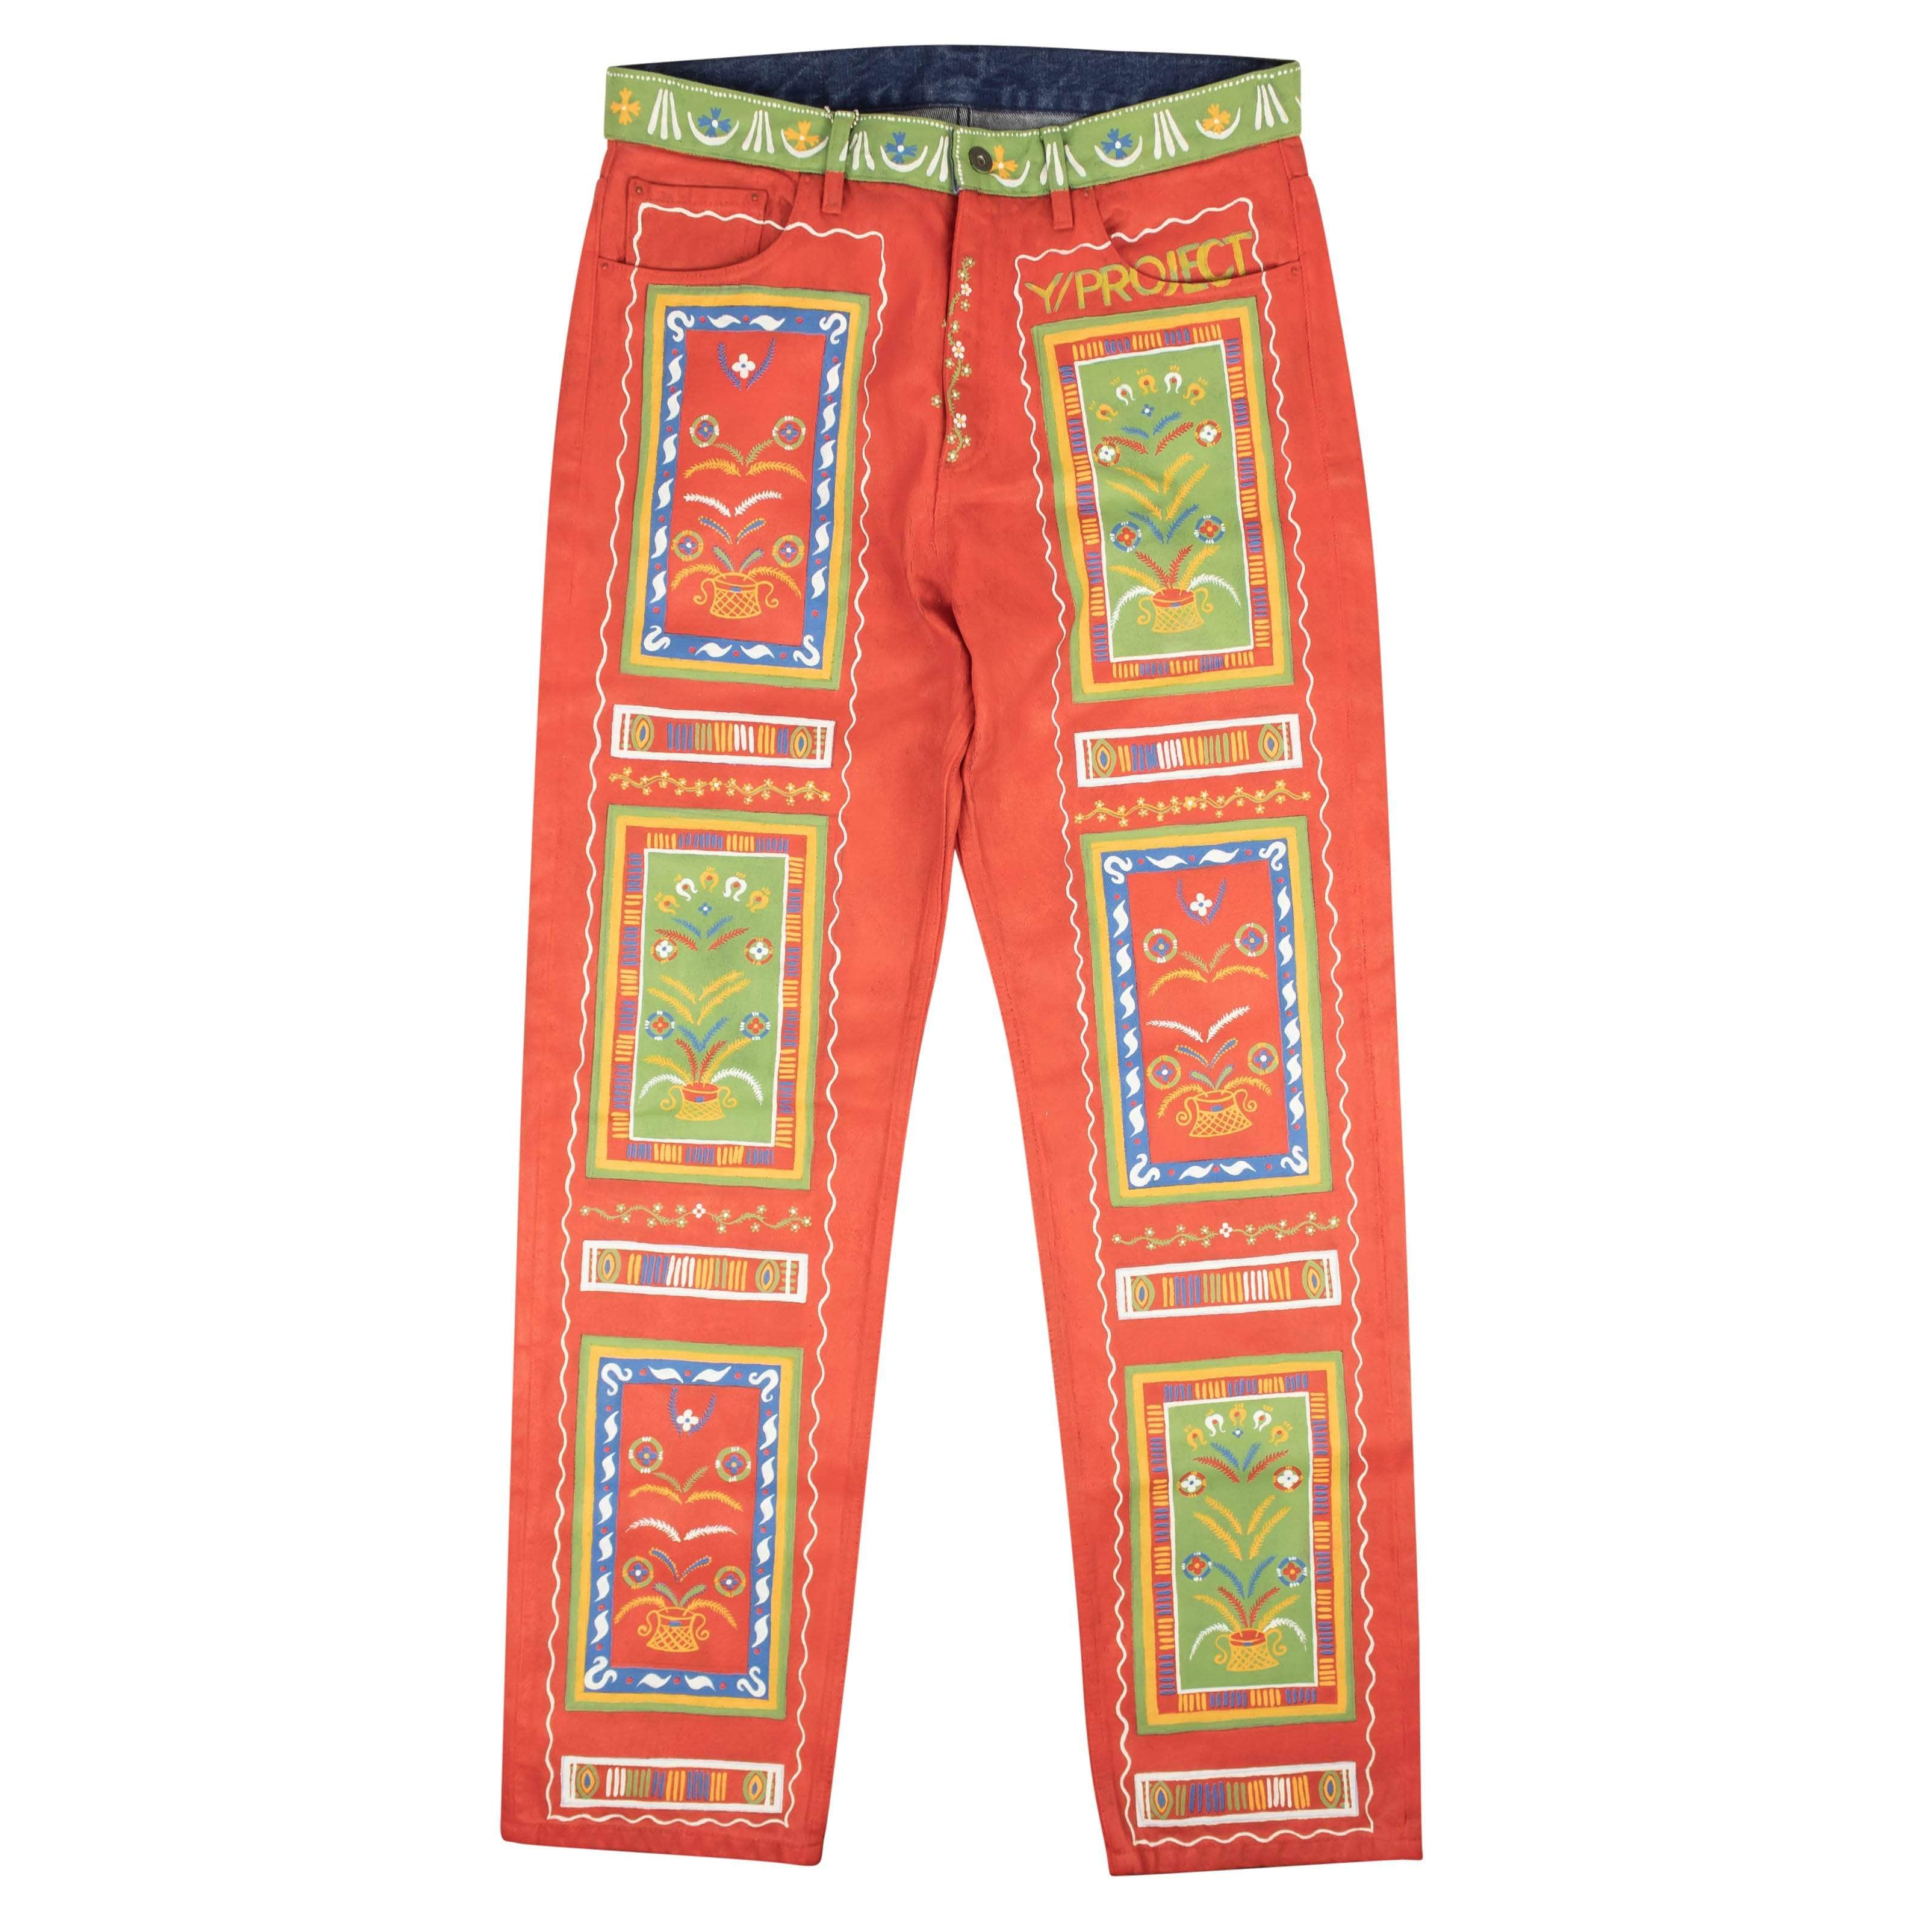 Y/Project 2000-5000, channelenable-all, chicmi, couponcollection, gender-mens, main-clothing, mens-casual-pants, mens-shoes, MixedApparel, size-m, y-project M Red Print Hand Painted Multi Denim Jeans 95-YPT-1009/M 95-YPT-1009/M